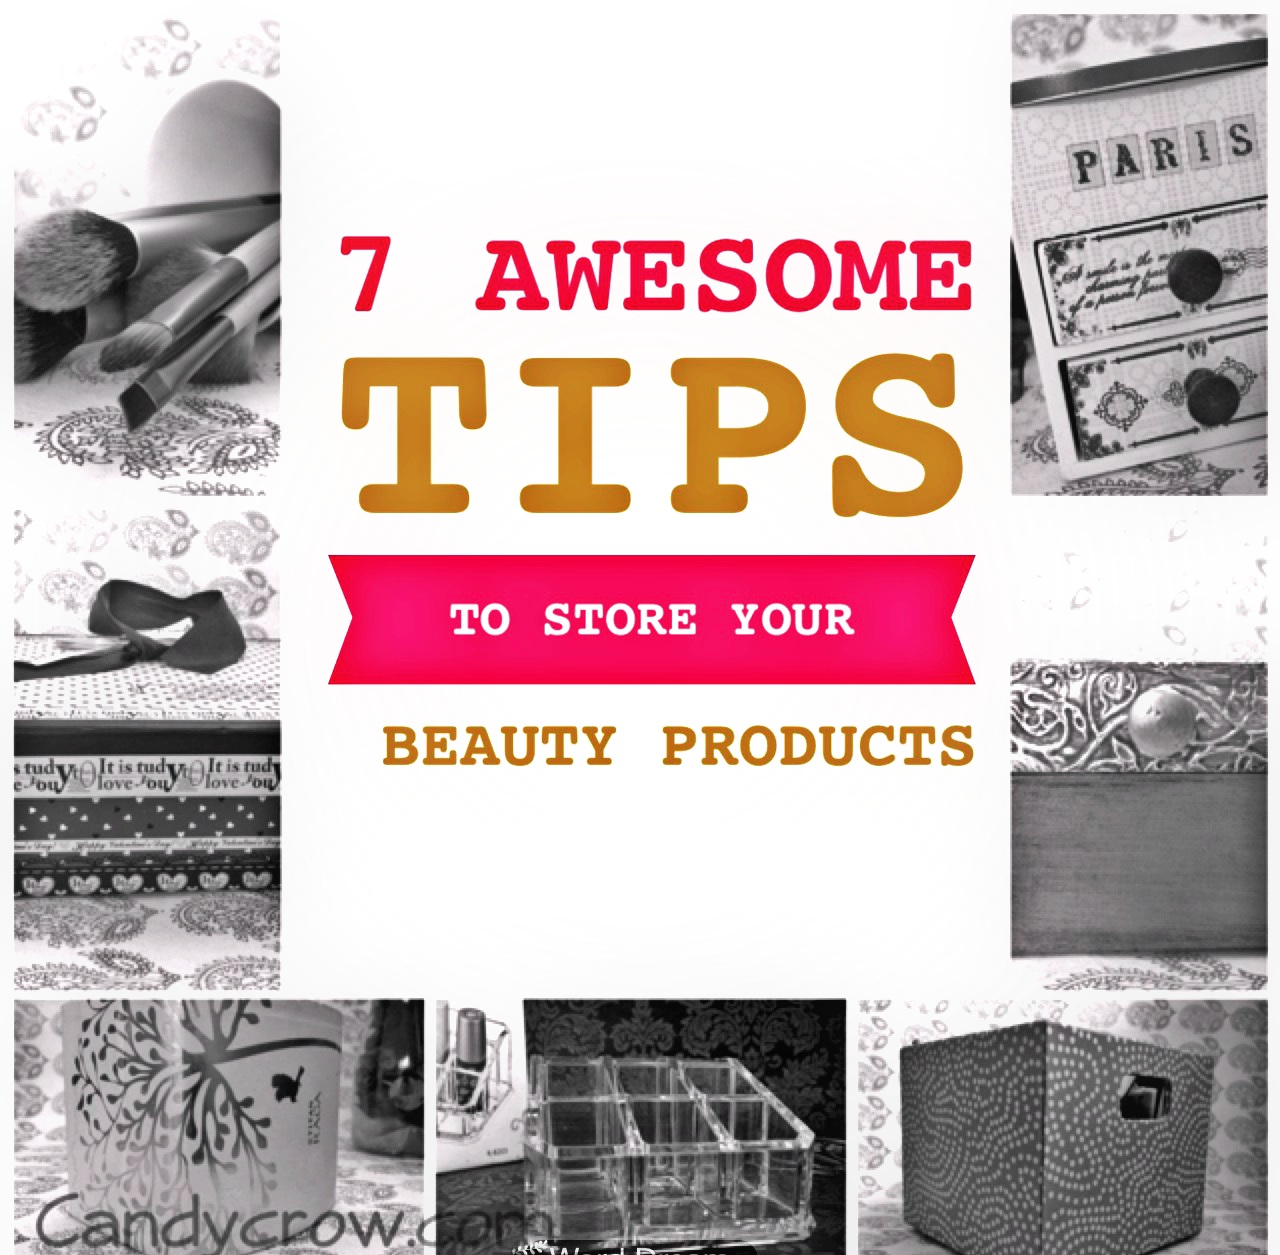 7 Awesome Ideas to Store Your Beauty Products